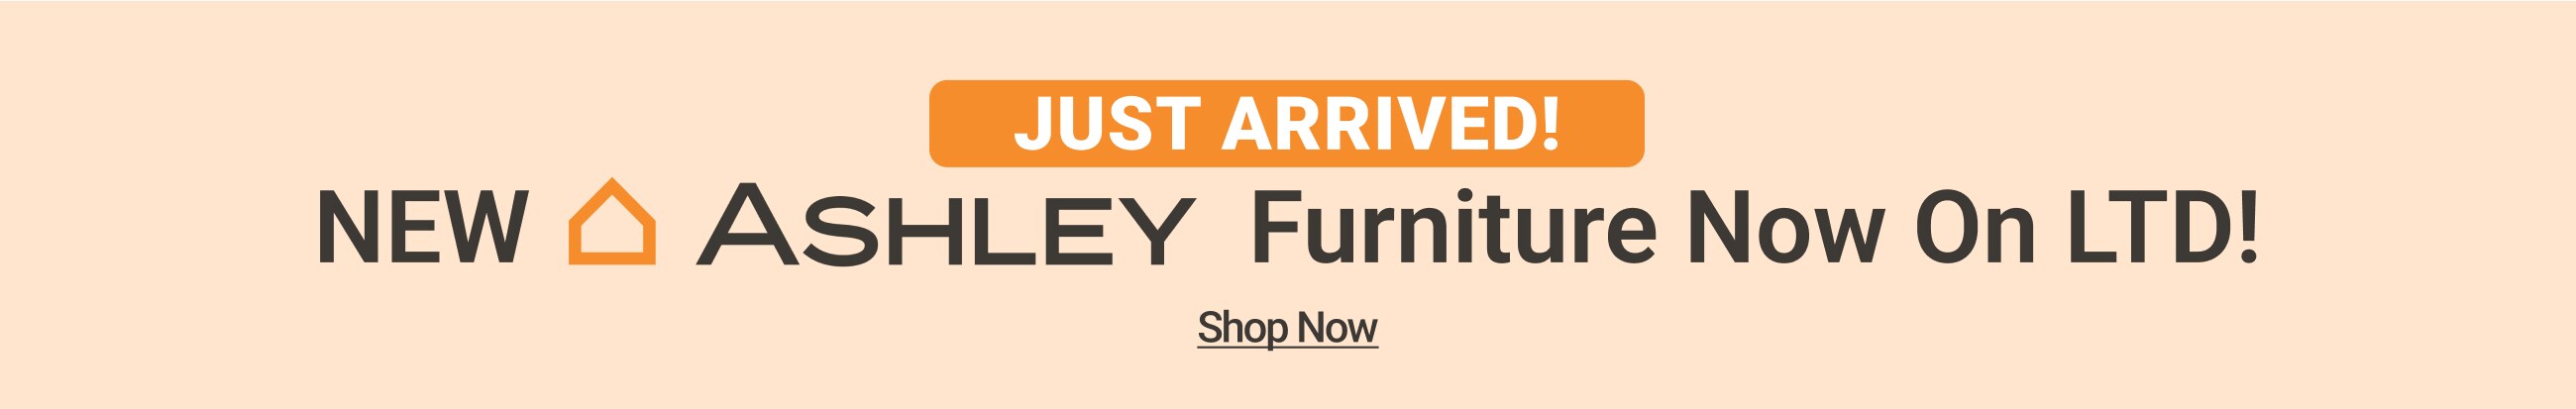 New! Ashley Furniture - Shop Now!